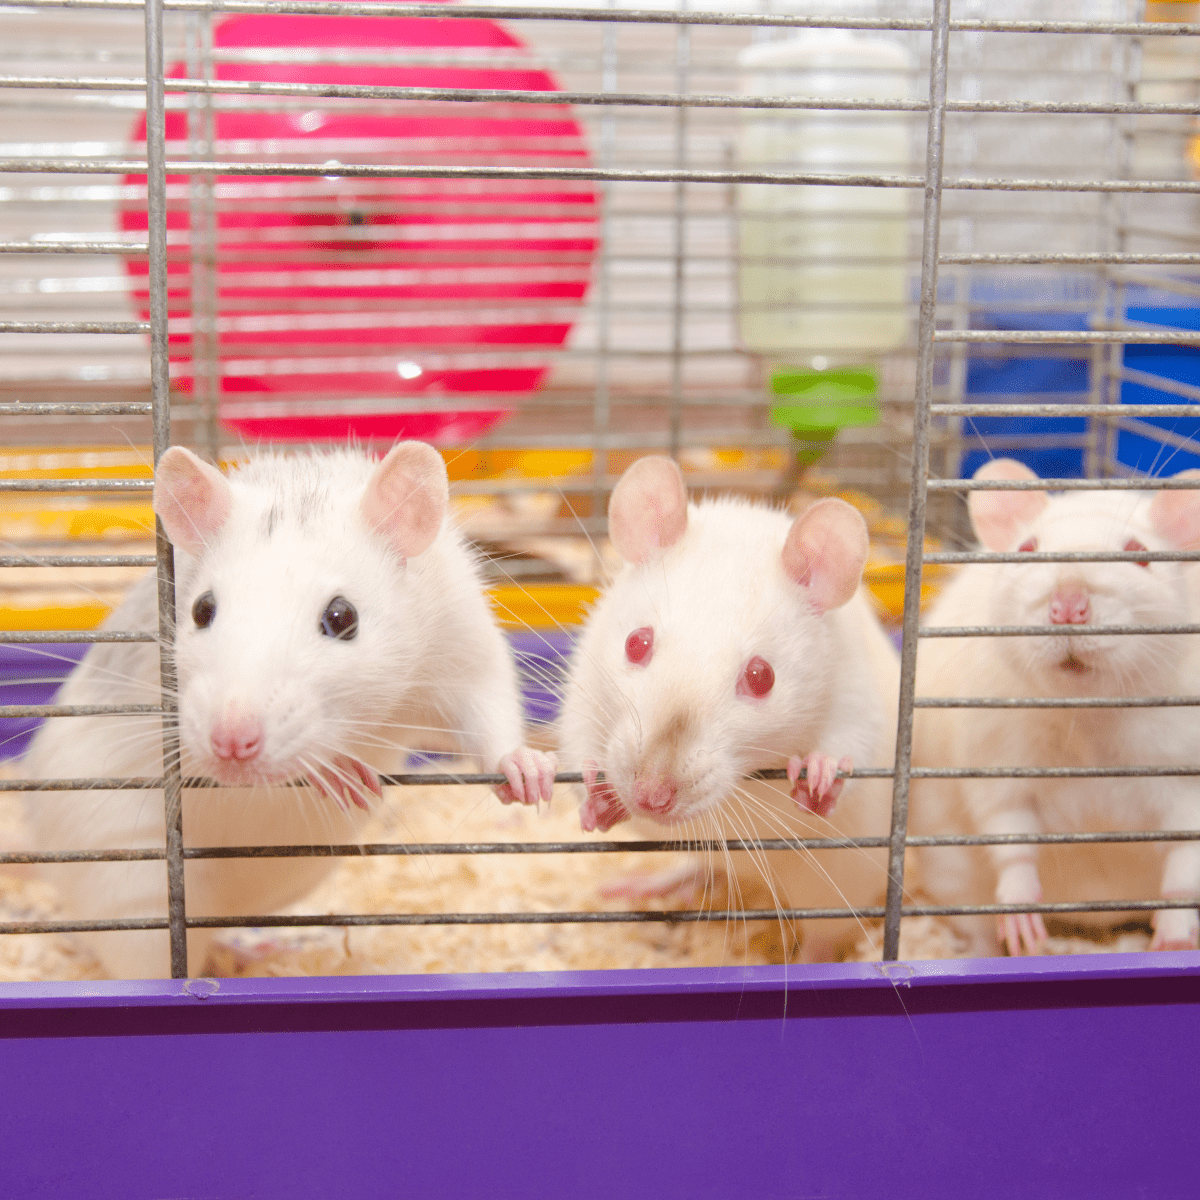 One Cage™ Ventilated Racks & Cages for rats, mice, hamsters, guinea pigs.